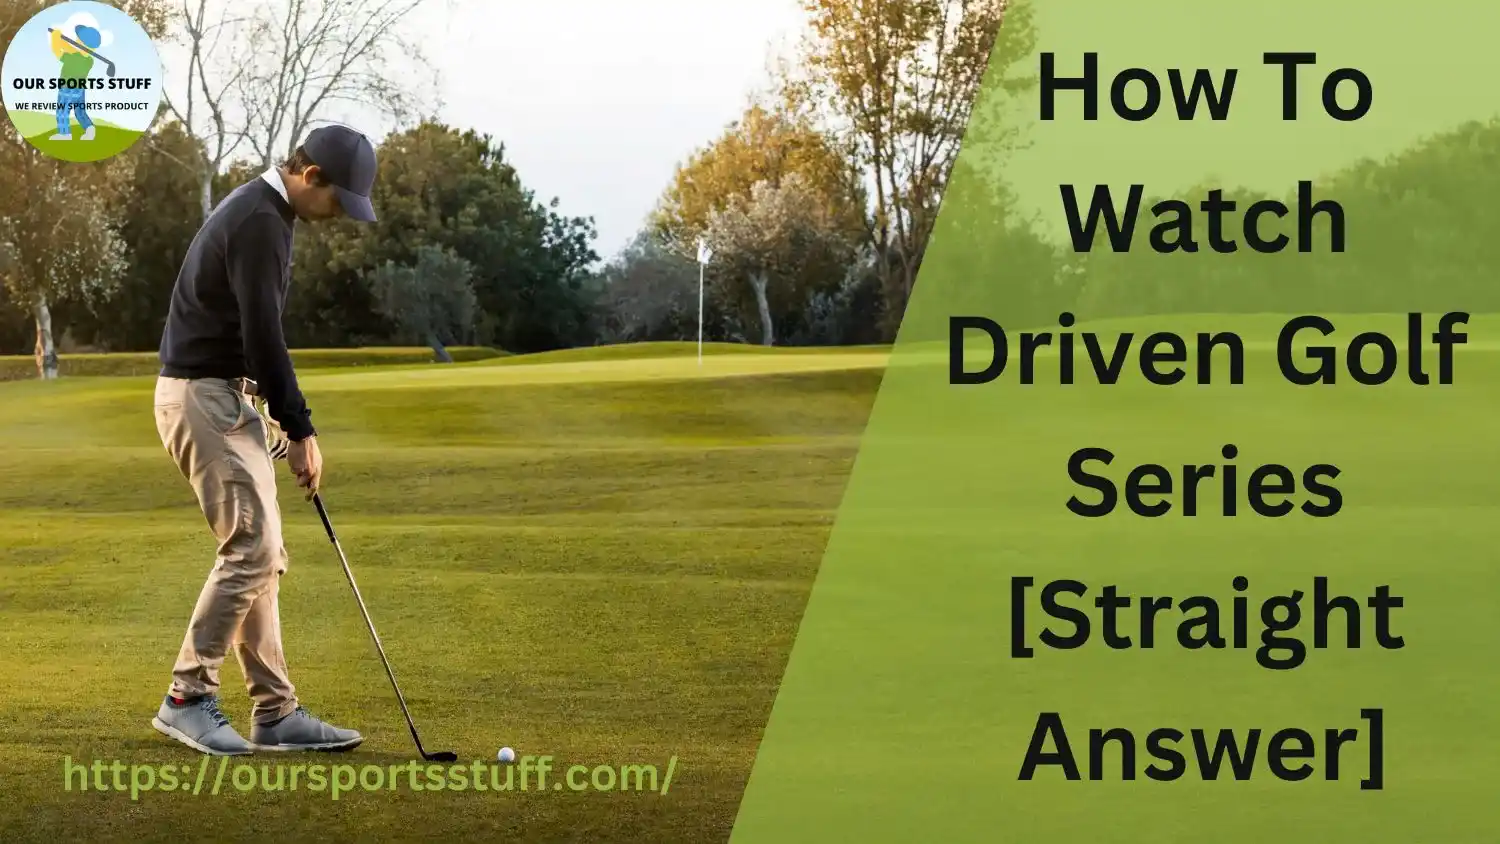 How To Watch Driven Golf Series [Straight Answer]